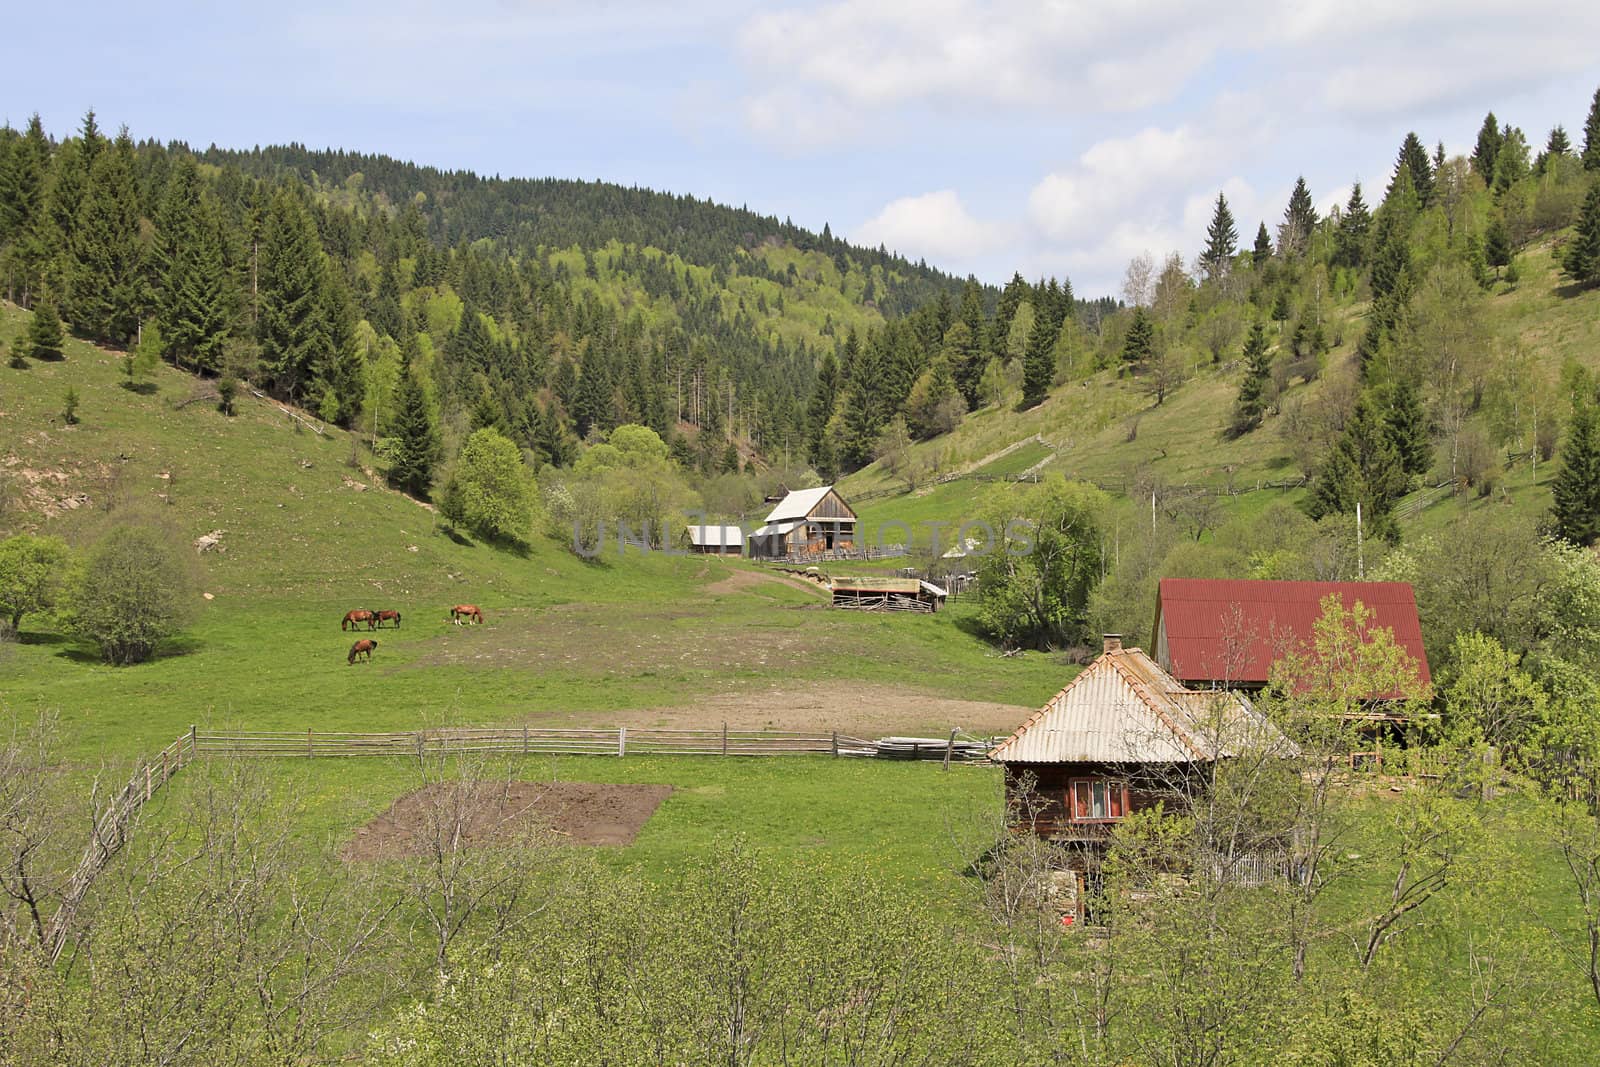 A nice valley with horses and some wooden houses